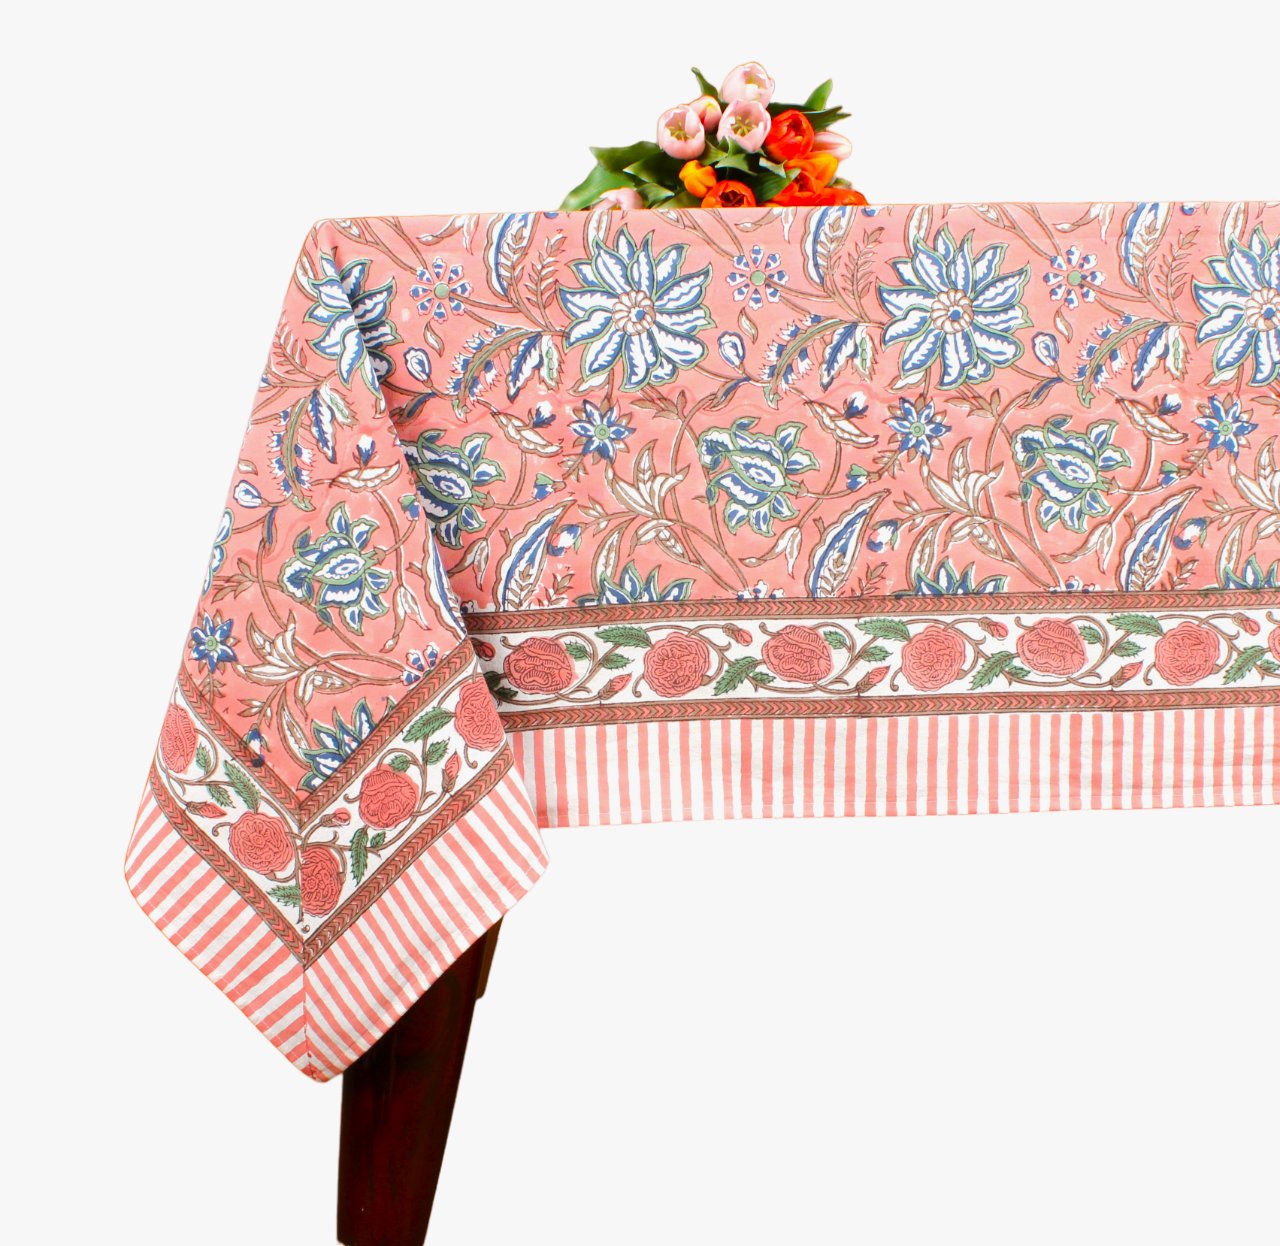 Fabricrush Peach and Berry Blue Rectangle 100% Cotton Hand Block Print Tablecloth Washable Tablecloth